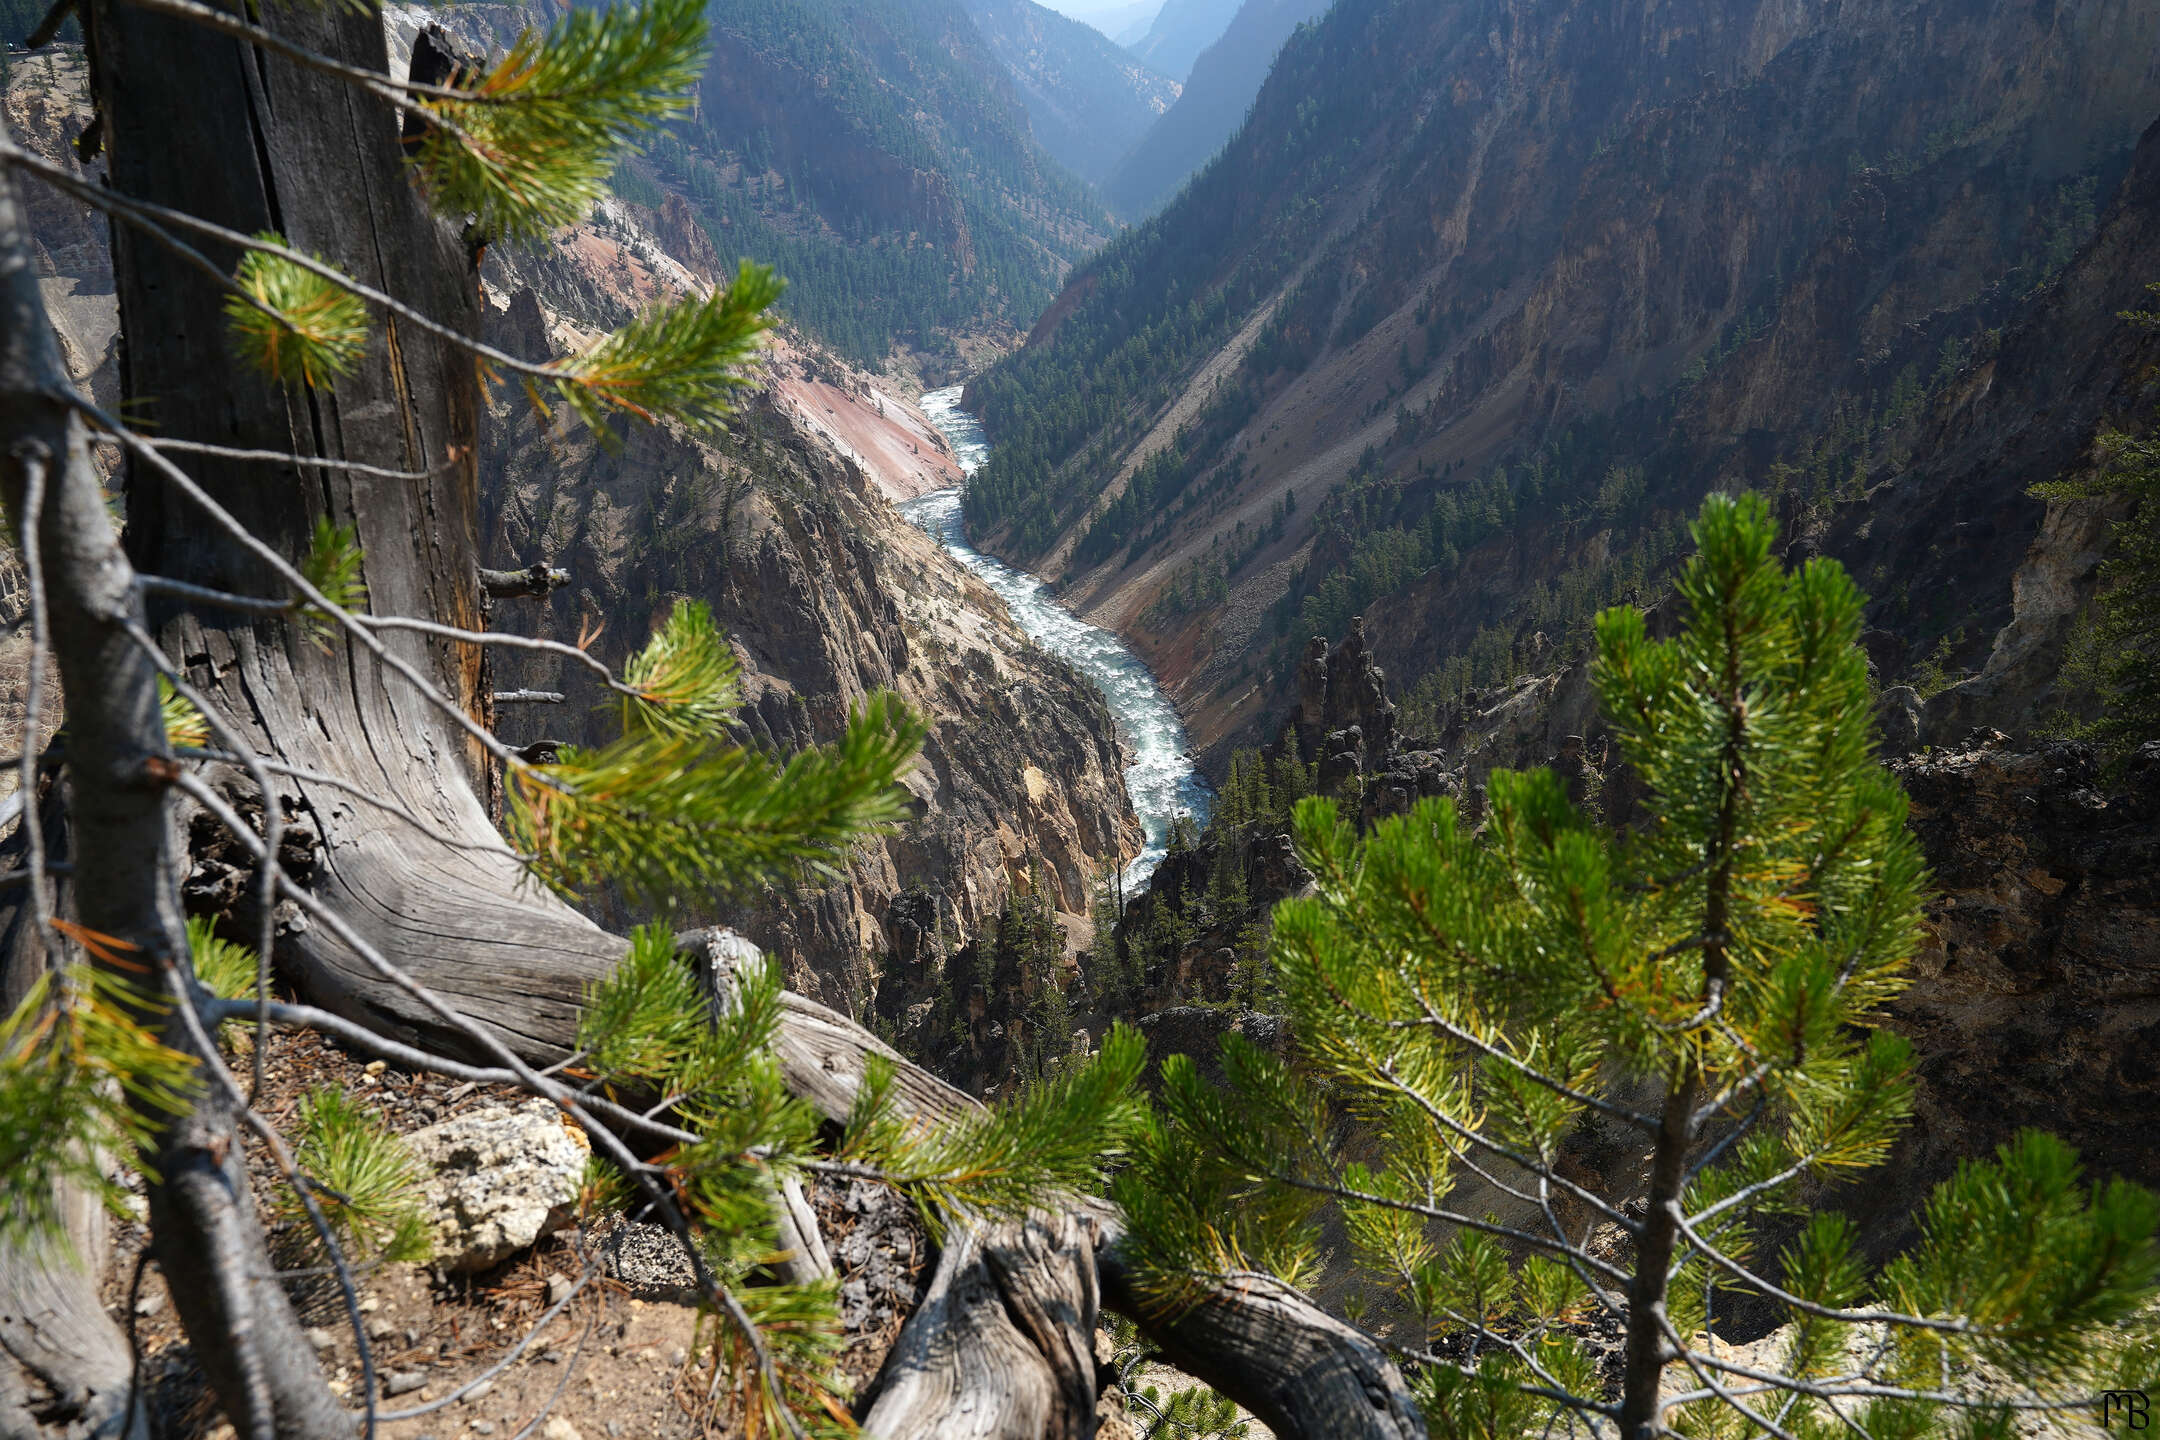 A view of the river in the canyon